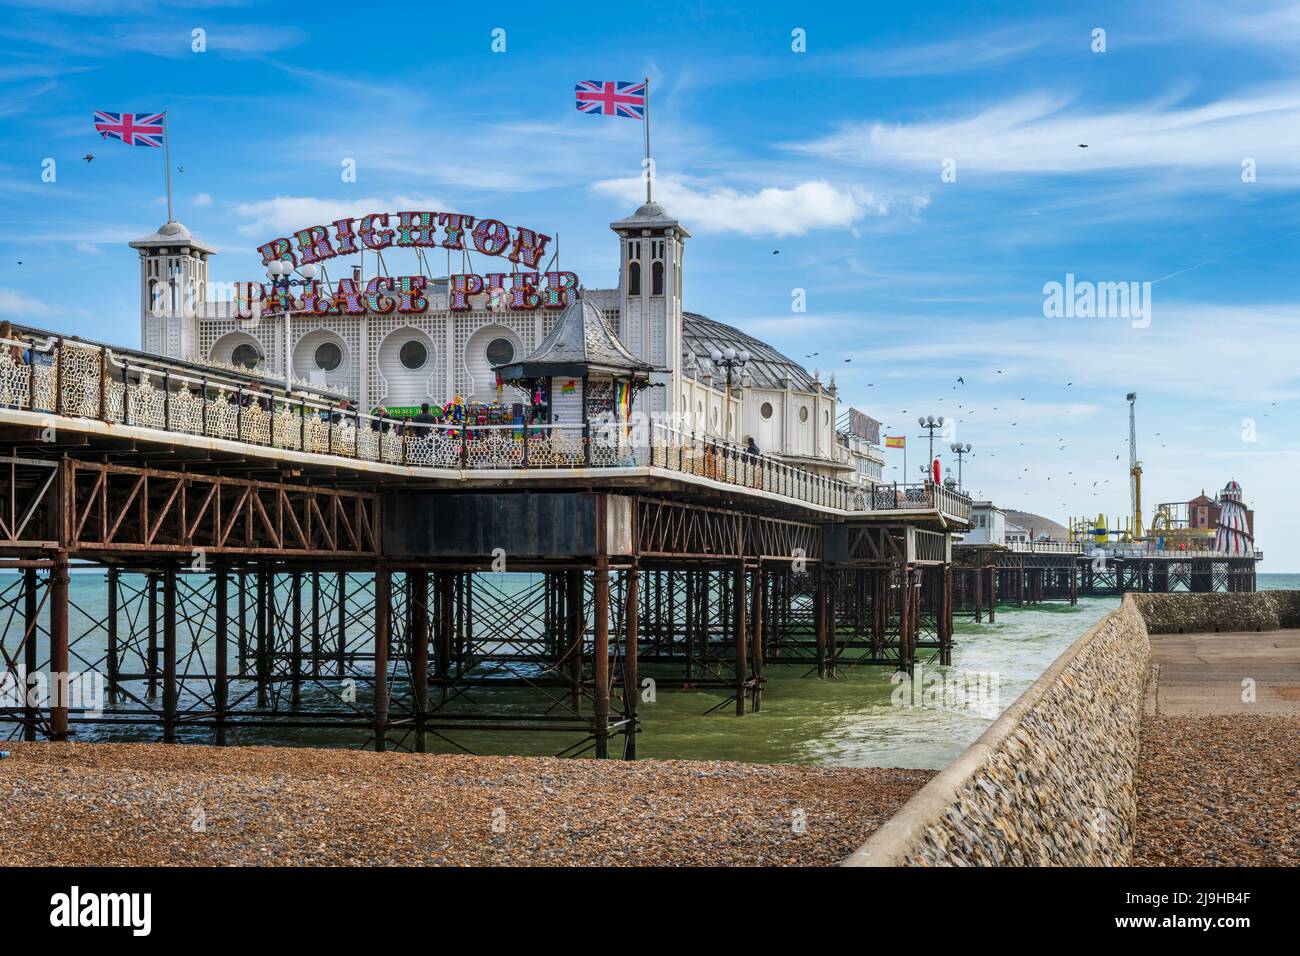 The Brighton Palace Pier, also known as Brighton Pier or Palace Pier, is a Grade II listed pleasure pier in Brighton and is the only one of three pier Stock Photo